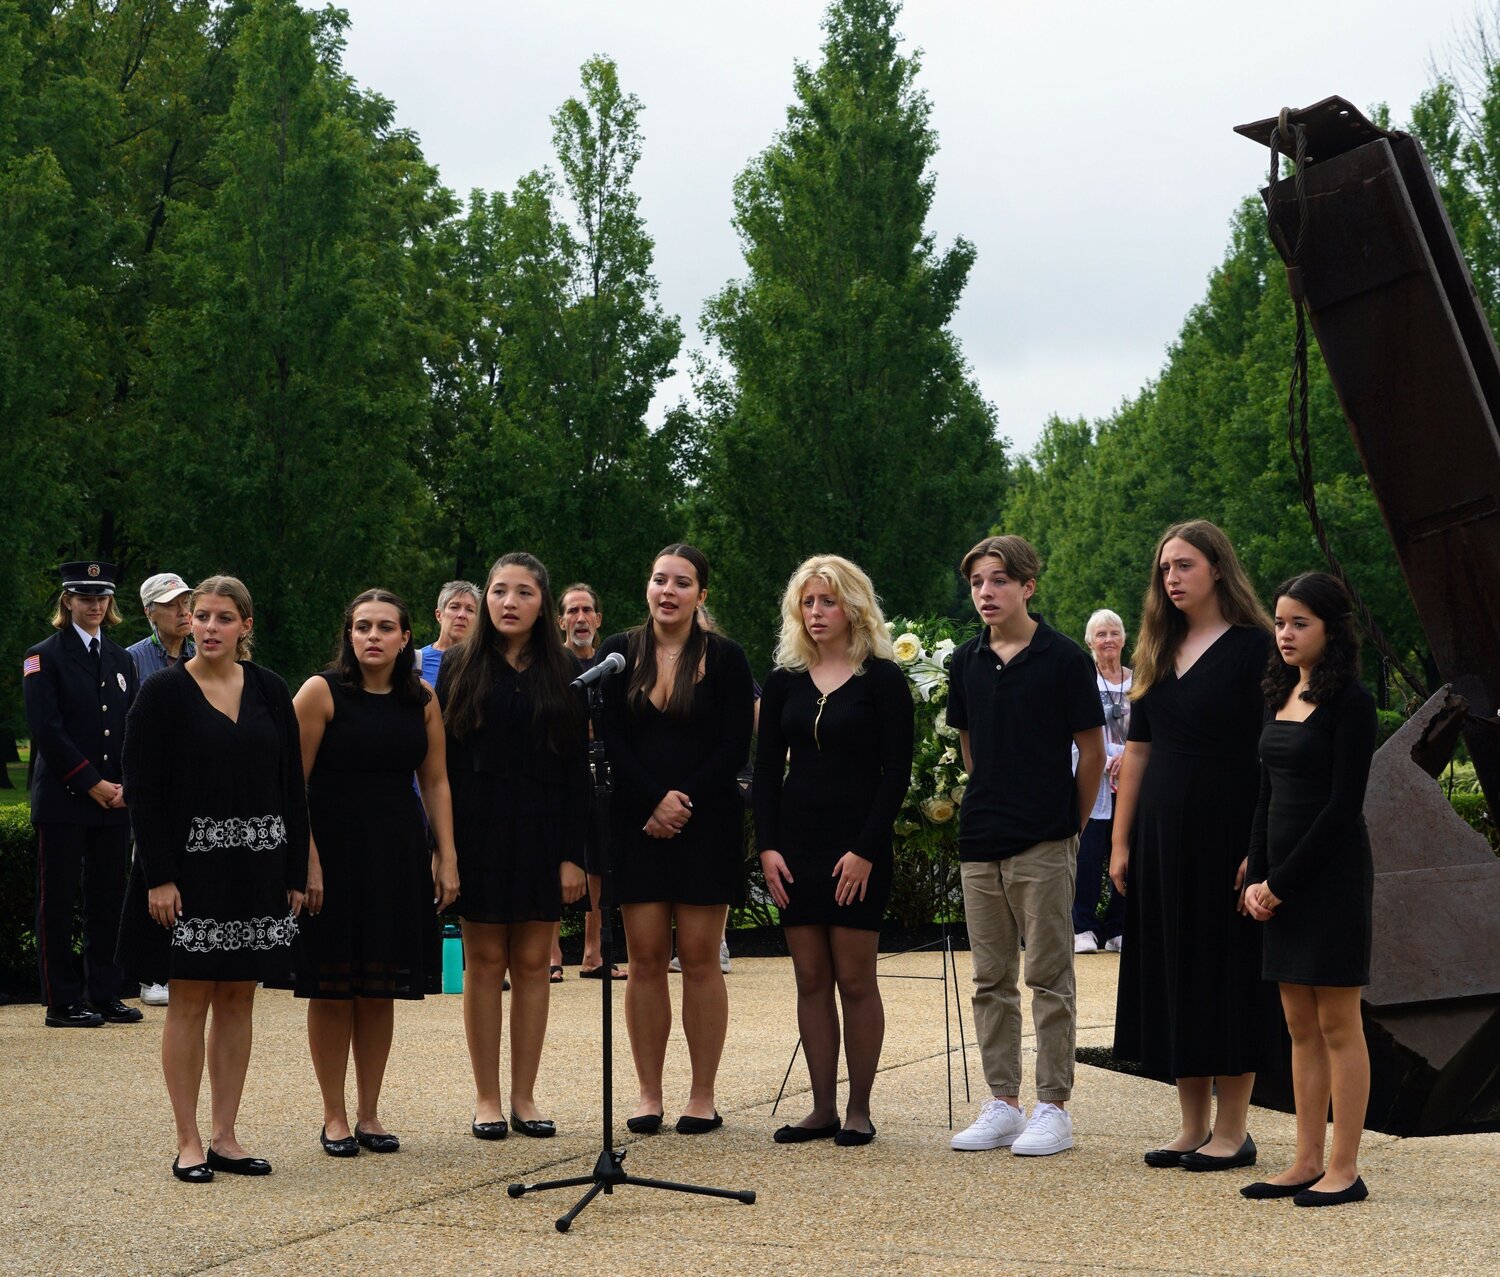 Stars of Tomorrow singers performed a number of moving pieces during Monday’s ceremony at The Garden of Reflection.